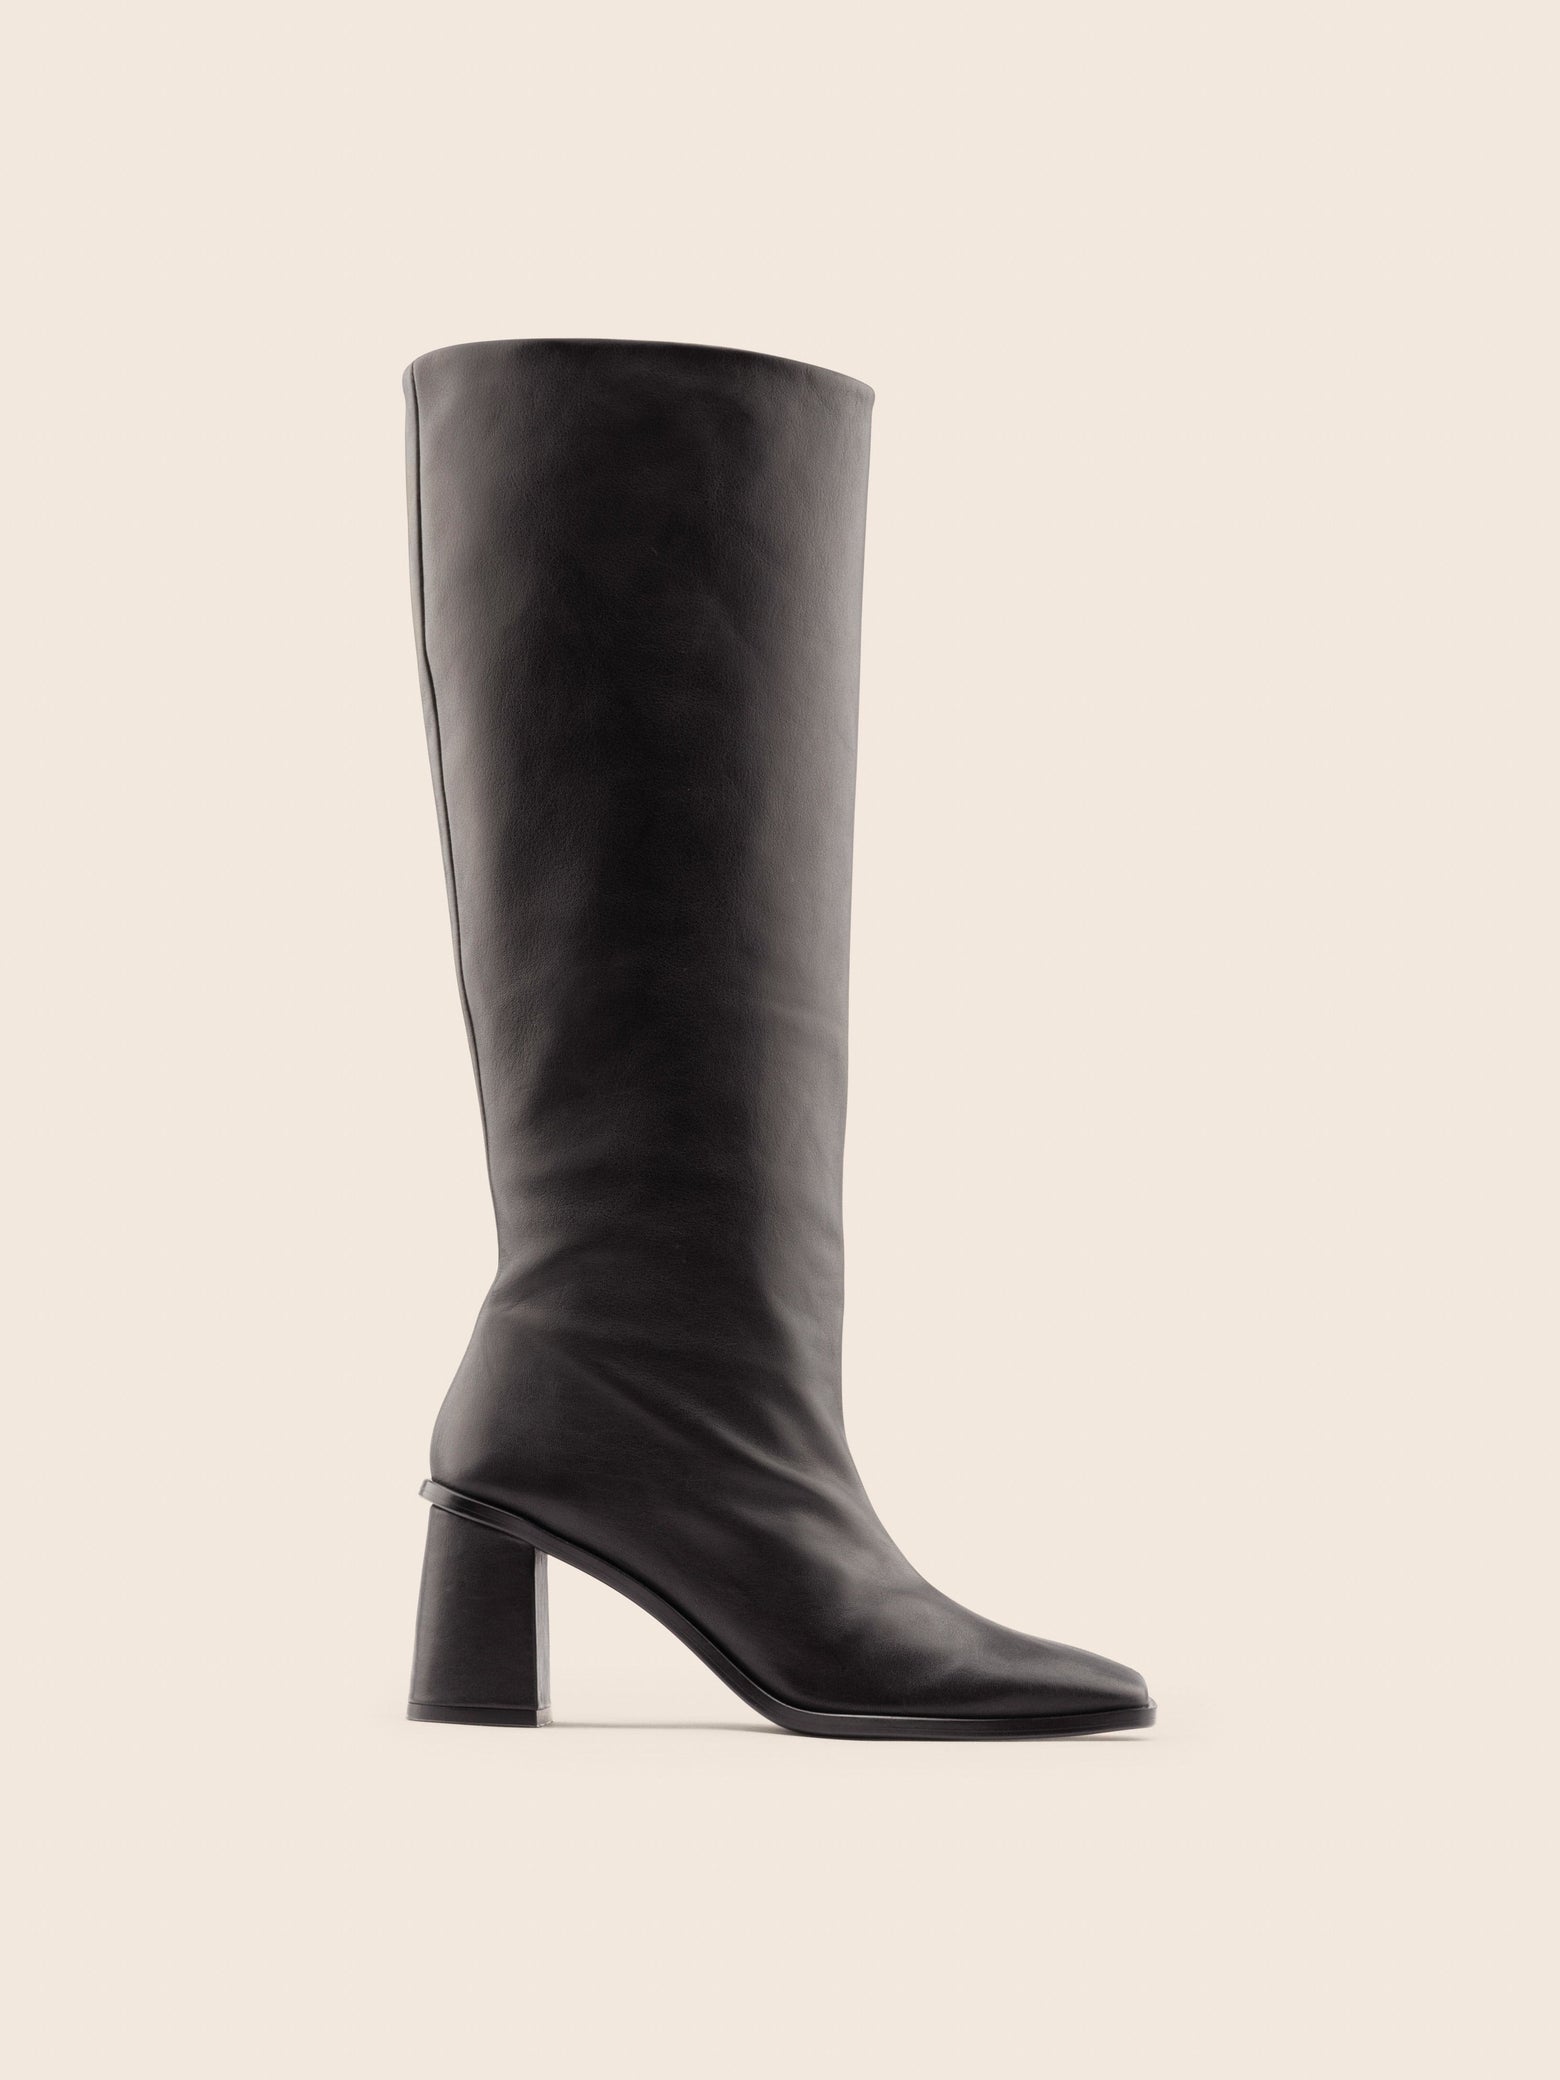 Lorca Black Leather Knee-High Boots | Handmade | Maguire Shoes